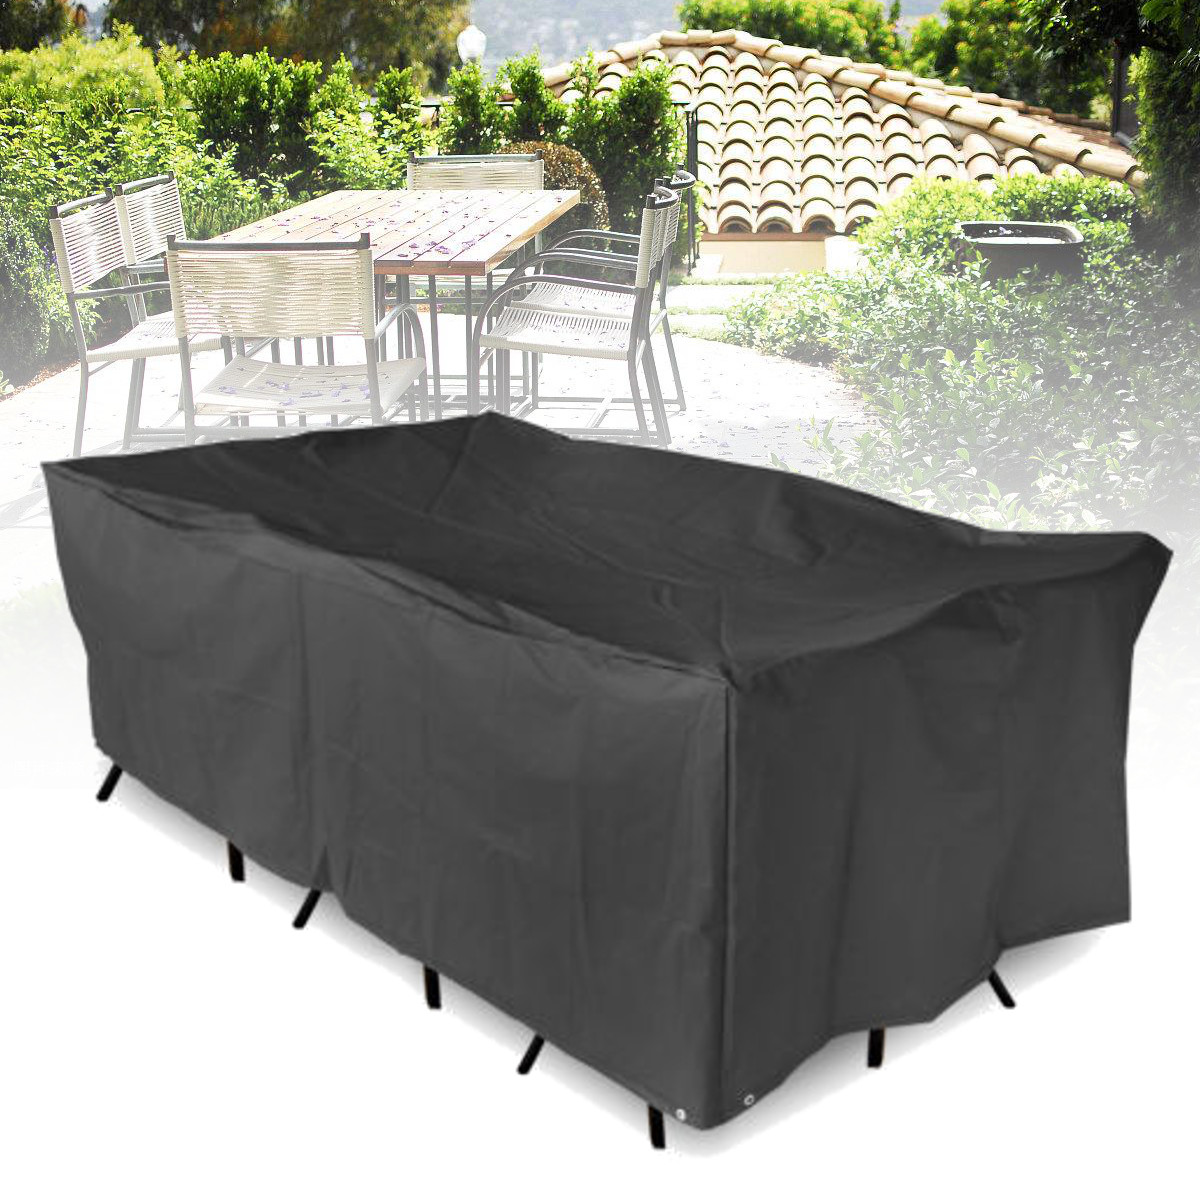 

Outdoor Furniture Waterproof Cover Garden Patio Table Chair Rectangular Shelter Anti-UV Dust Protector